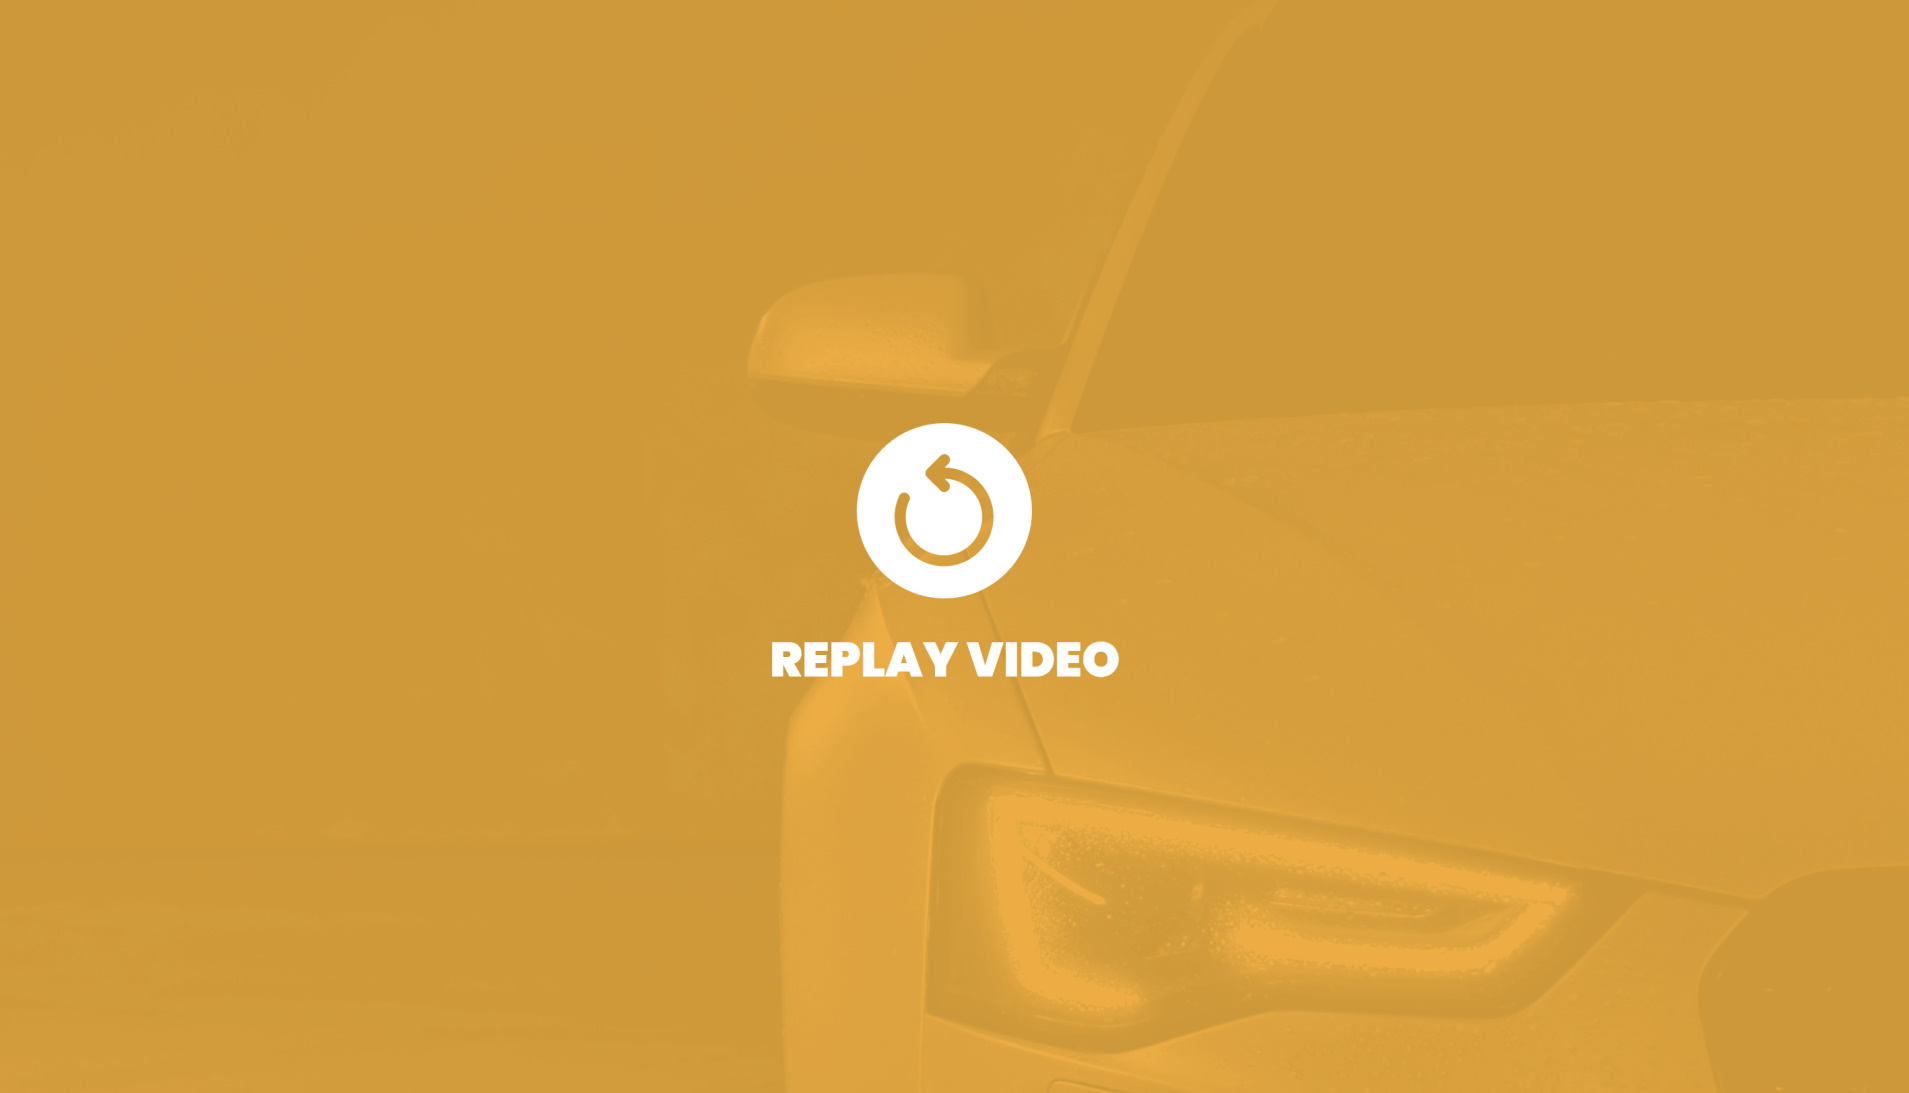 Replay the video button